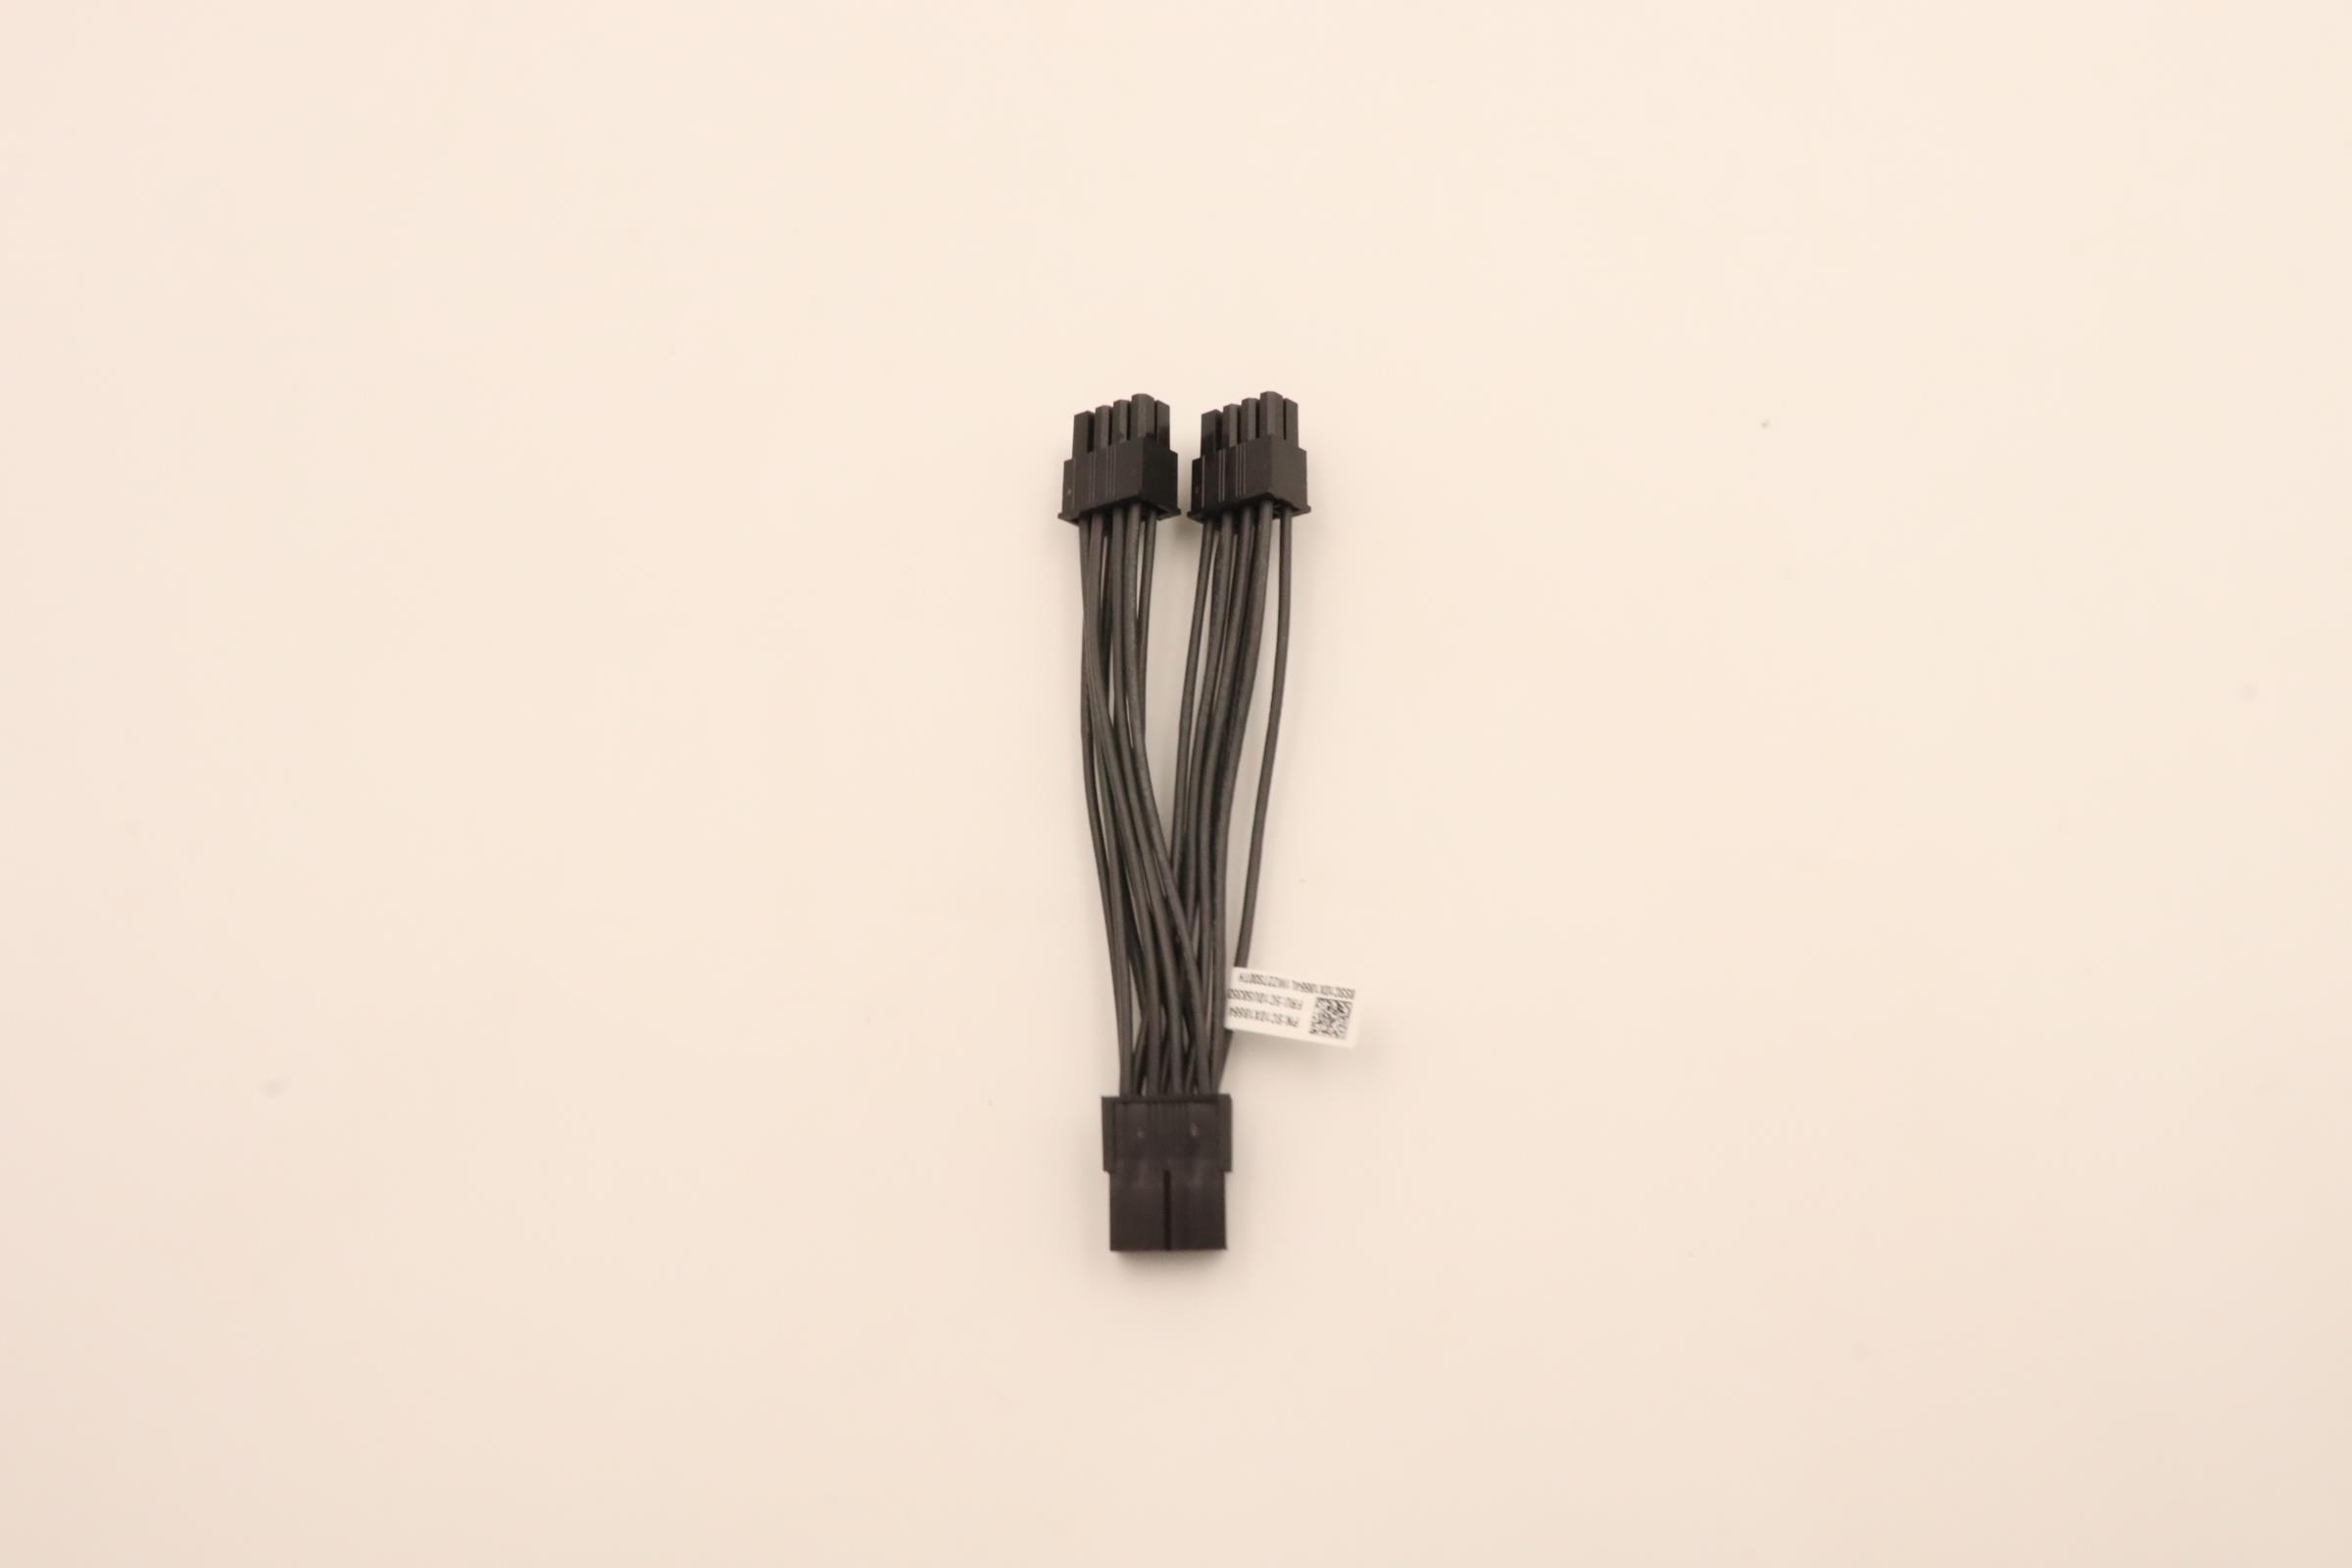 Lenovo Part  Original Lenovo Fru, 2*4 pin female  to  2*4pin+2*4pin male  mini-fit with new latch 100mm Cable